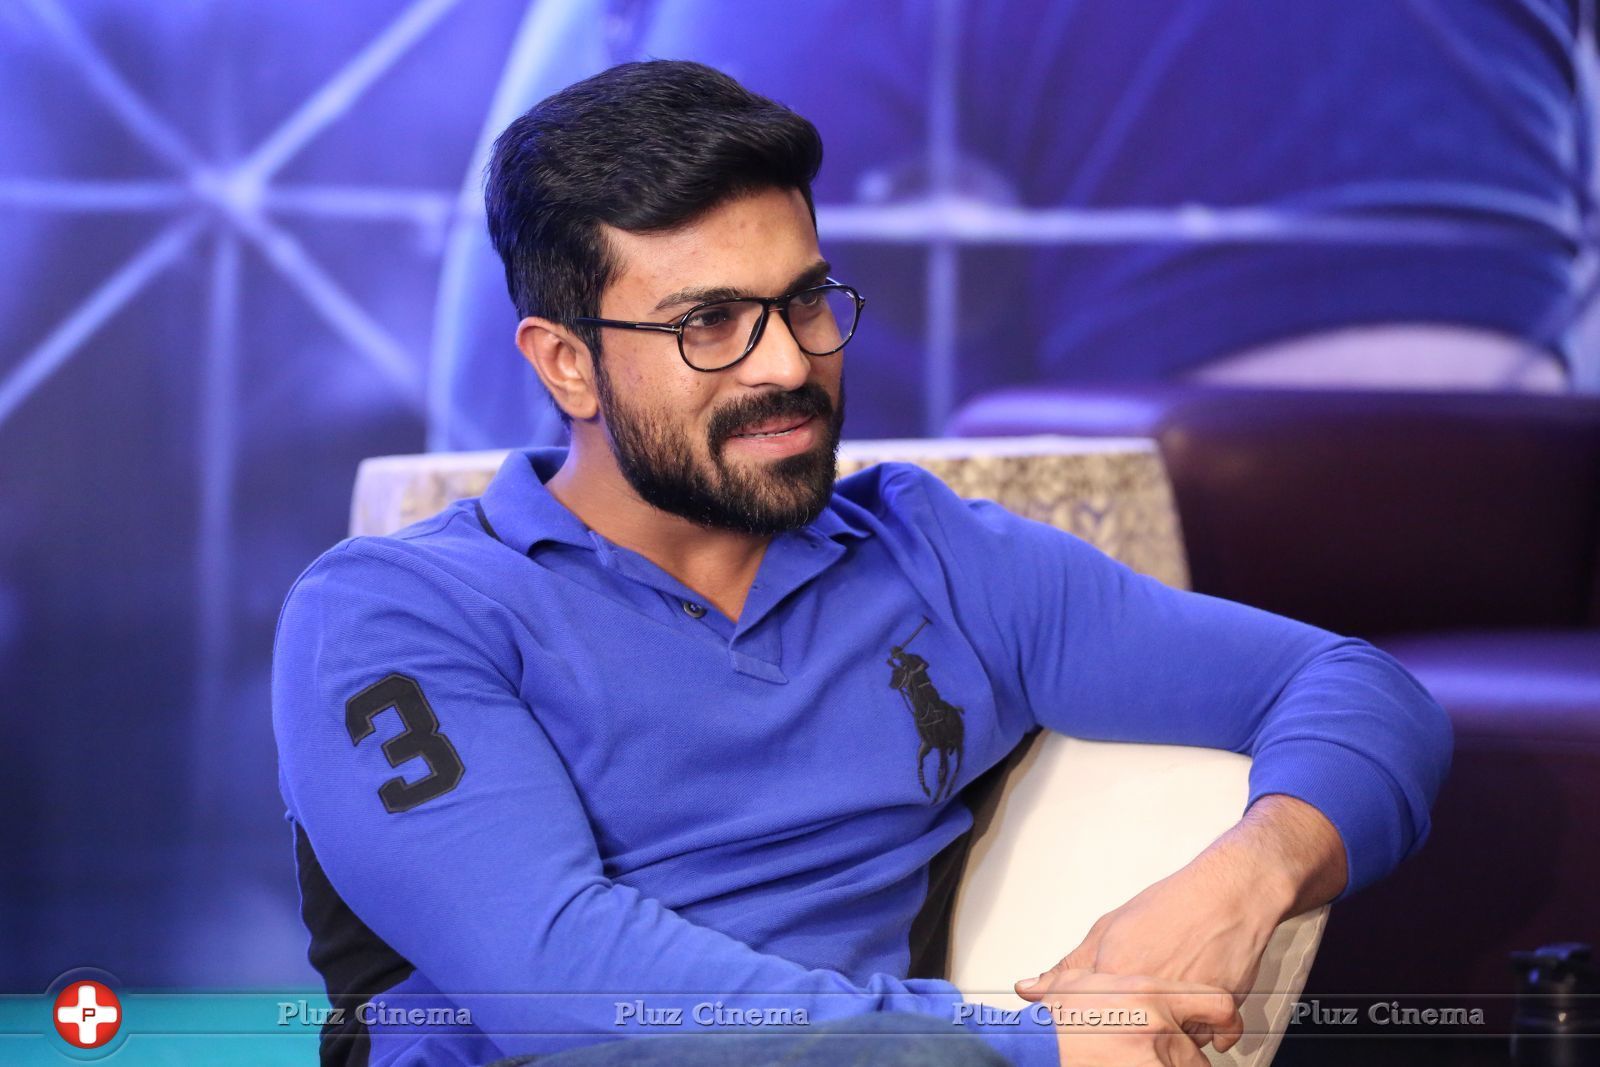 Ram Charan Interview For Dhruva Photos | Picture 1444656